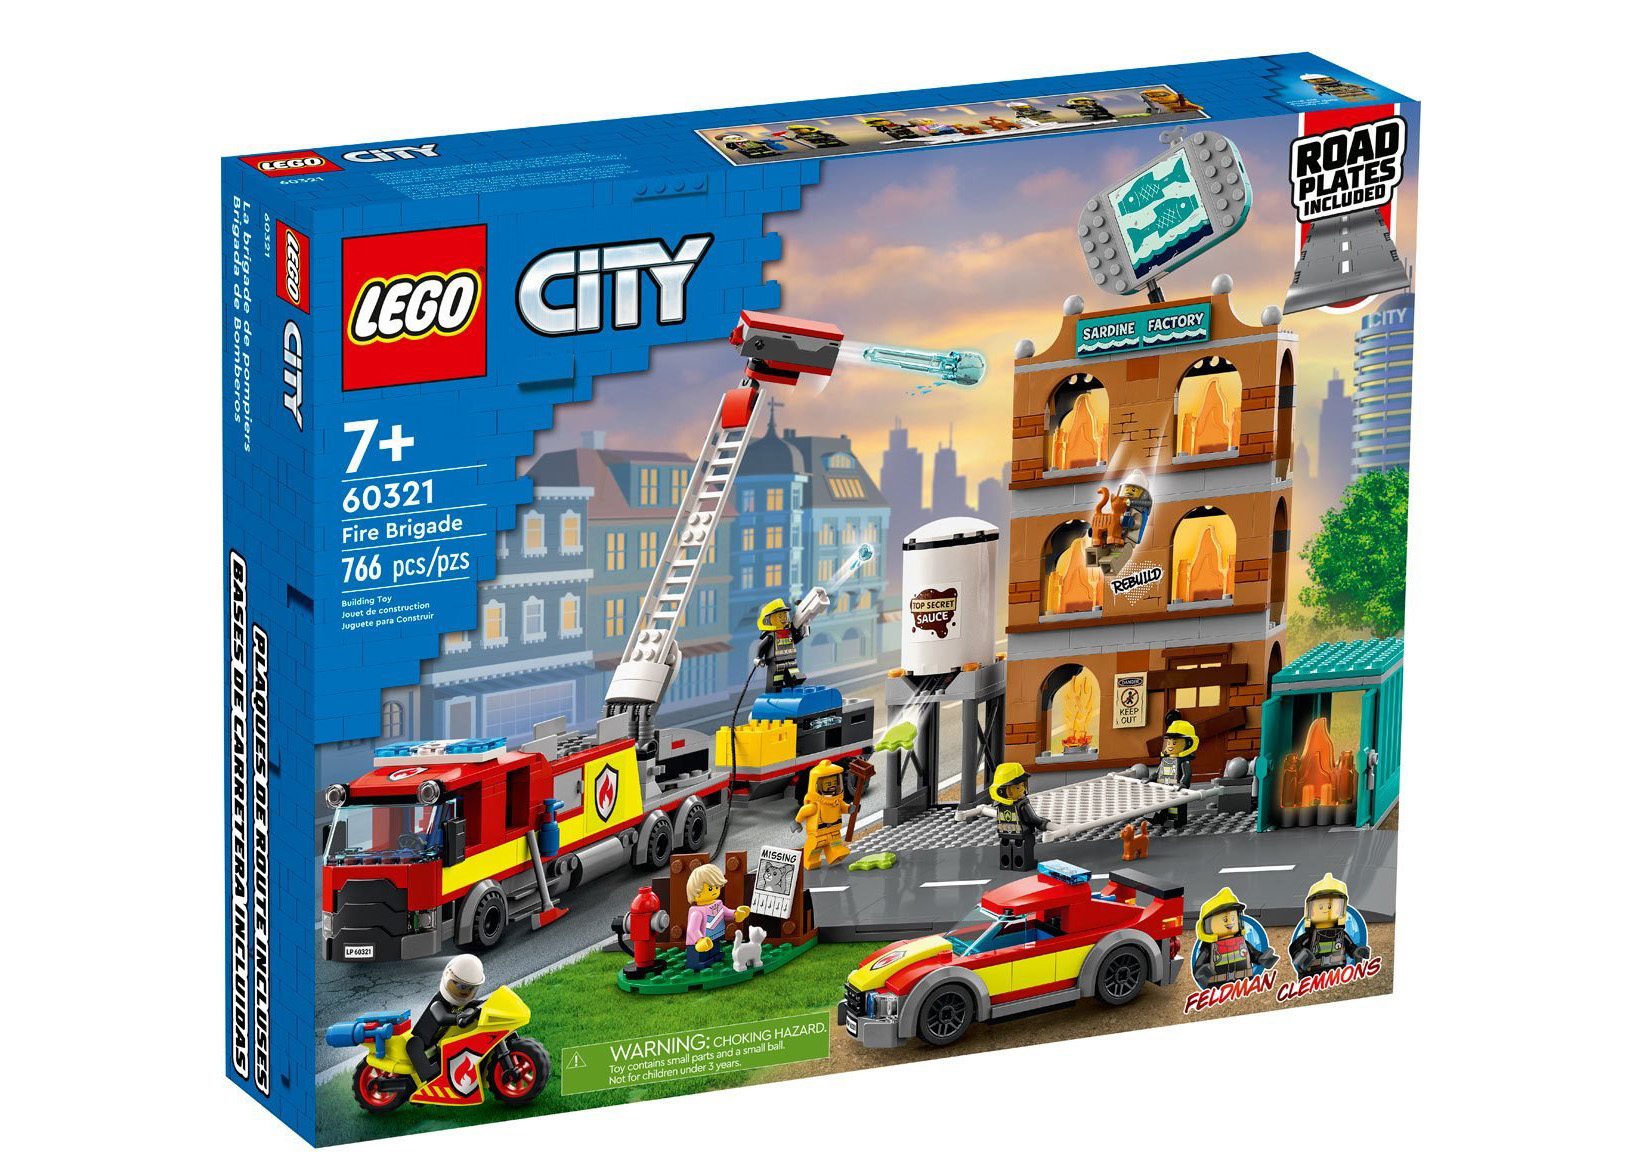 LEGO City Fire Station and Fire Truck Set 60375 - TW